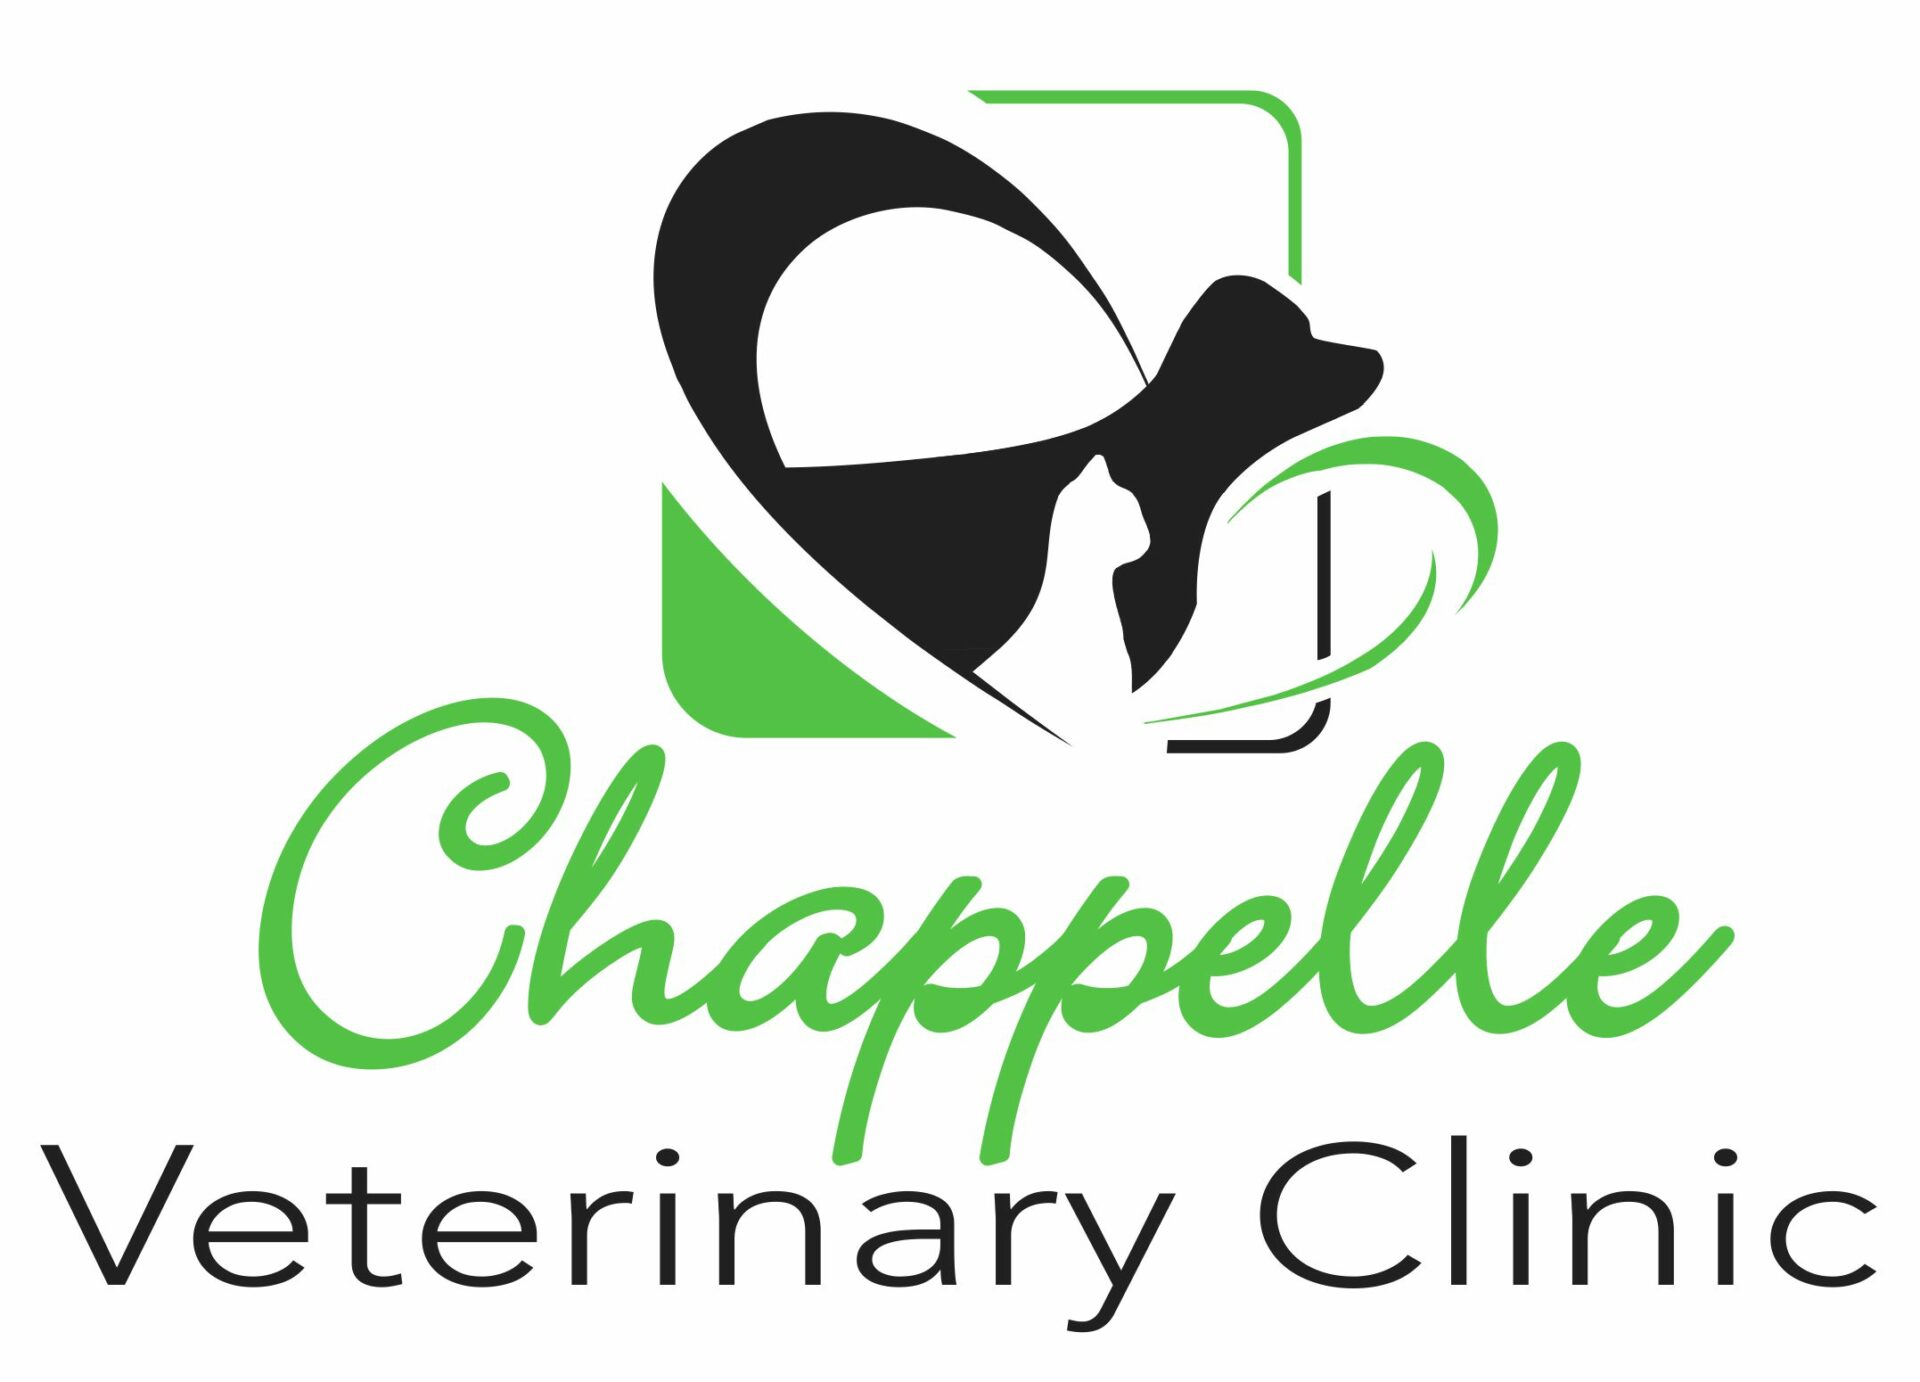 Chappelle Veterinary Clinic